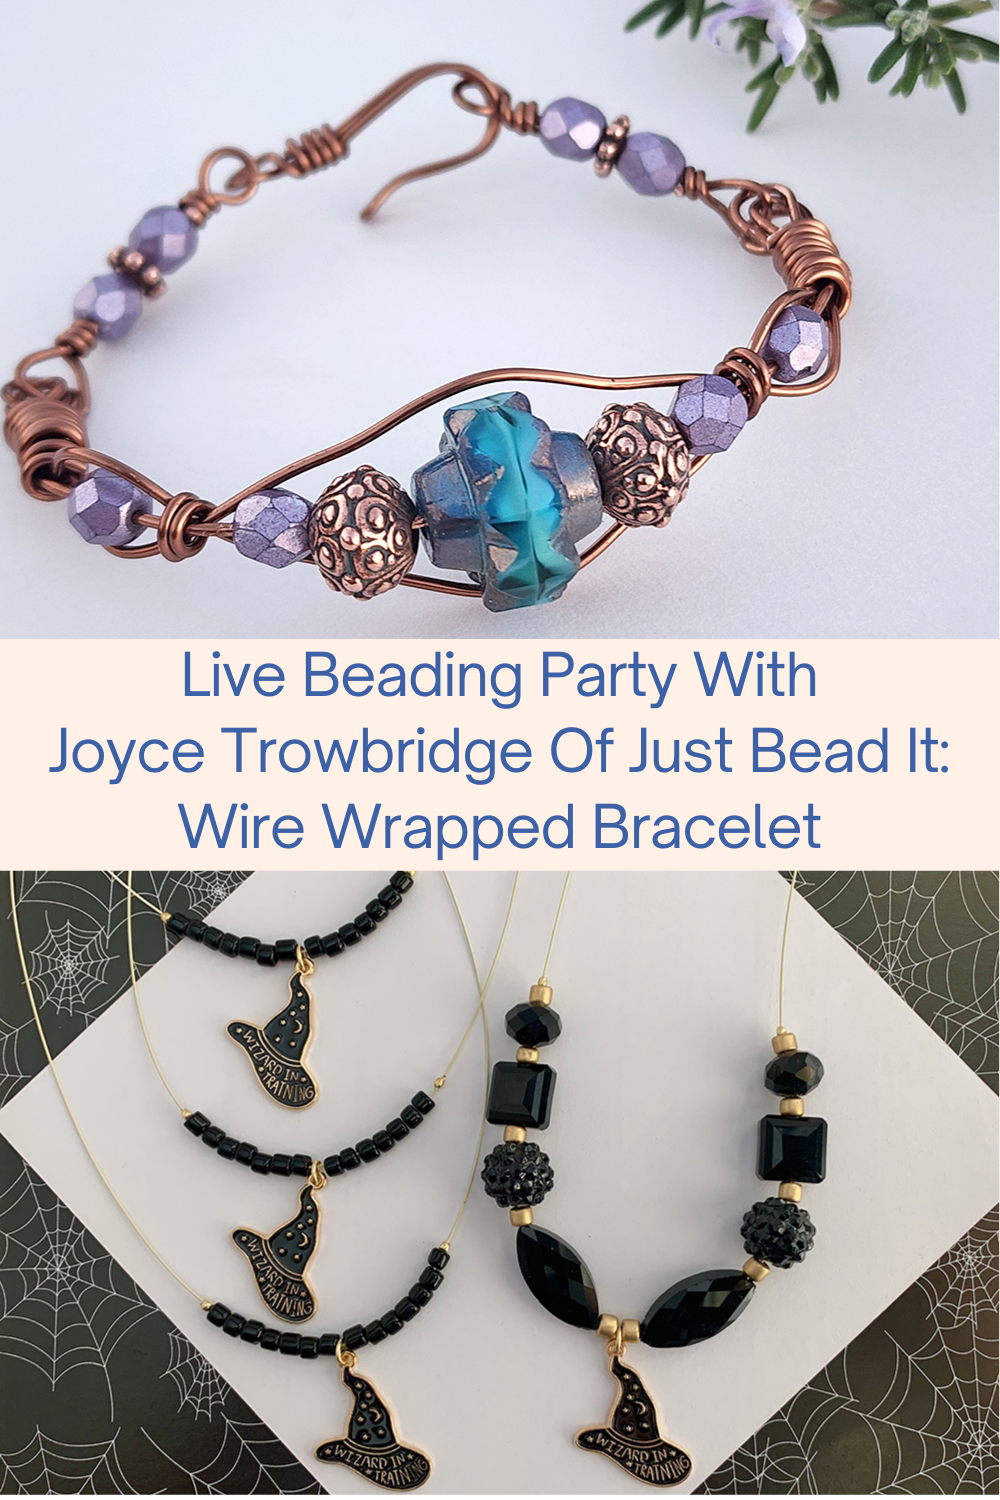 Live Beading Party With Joyce Trowbridge Of Just Bead It Wire Wrapped Bracelet